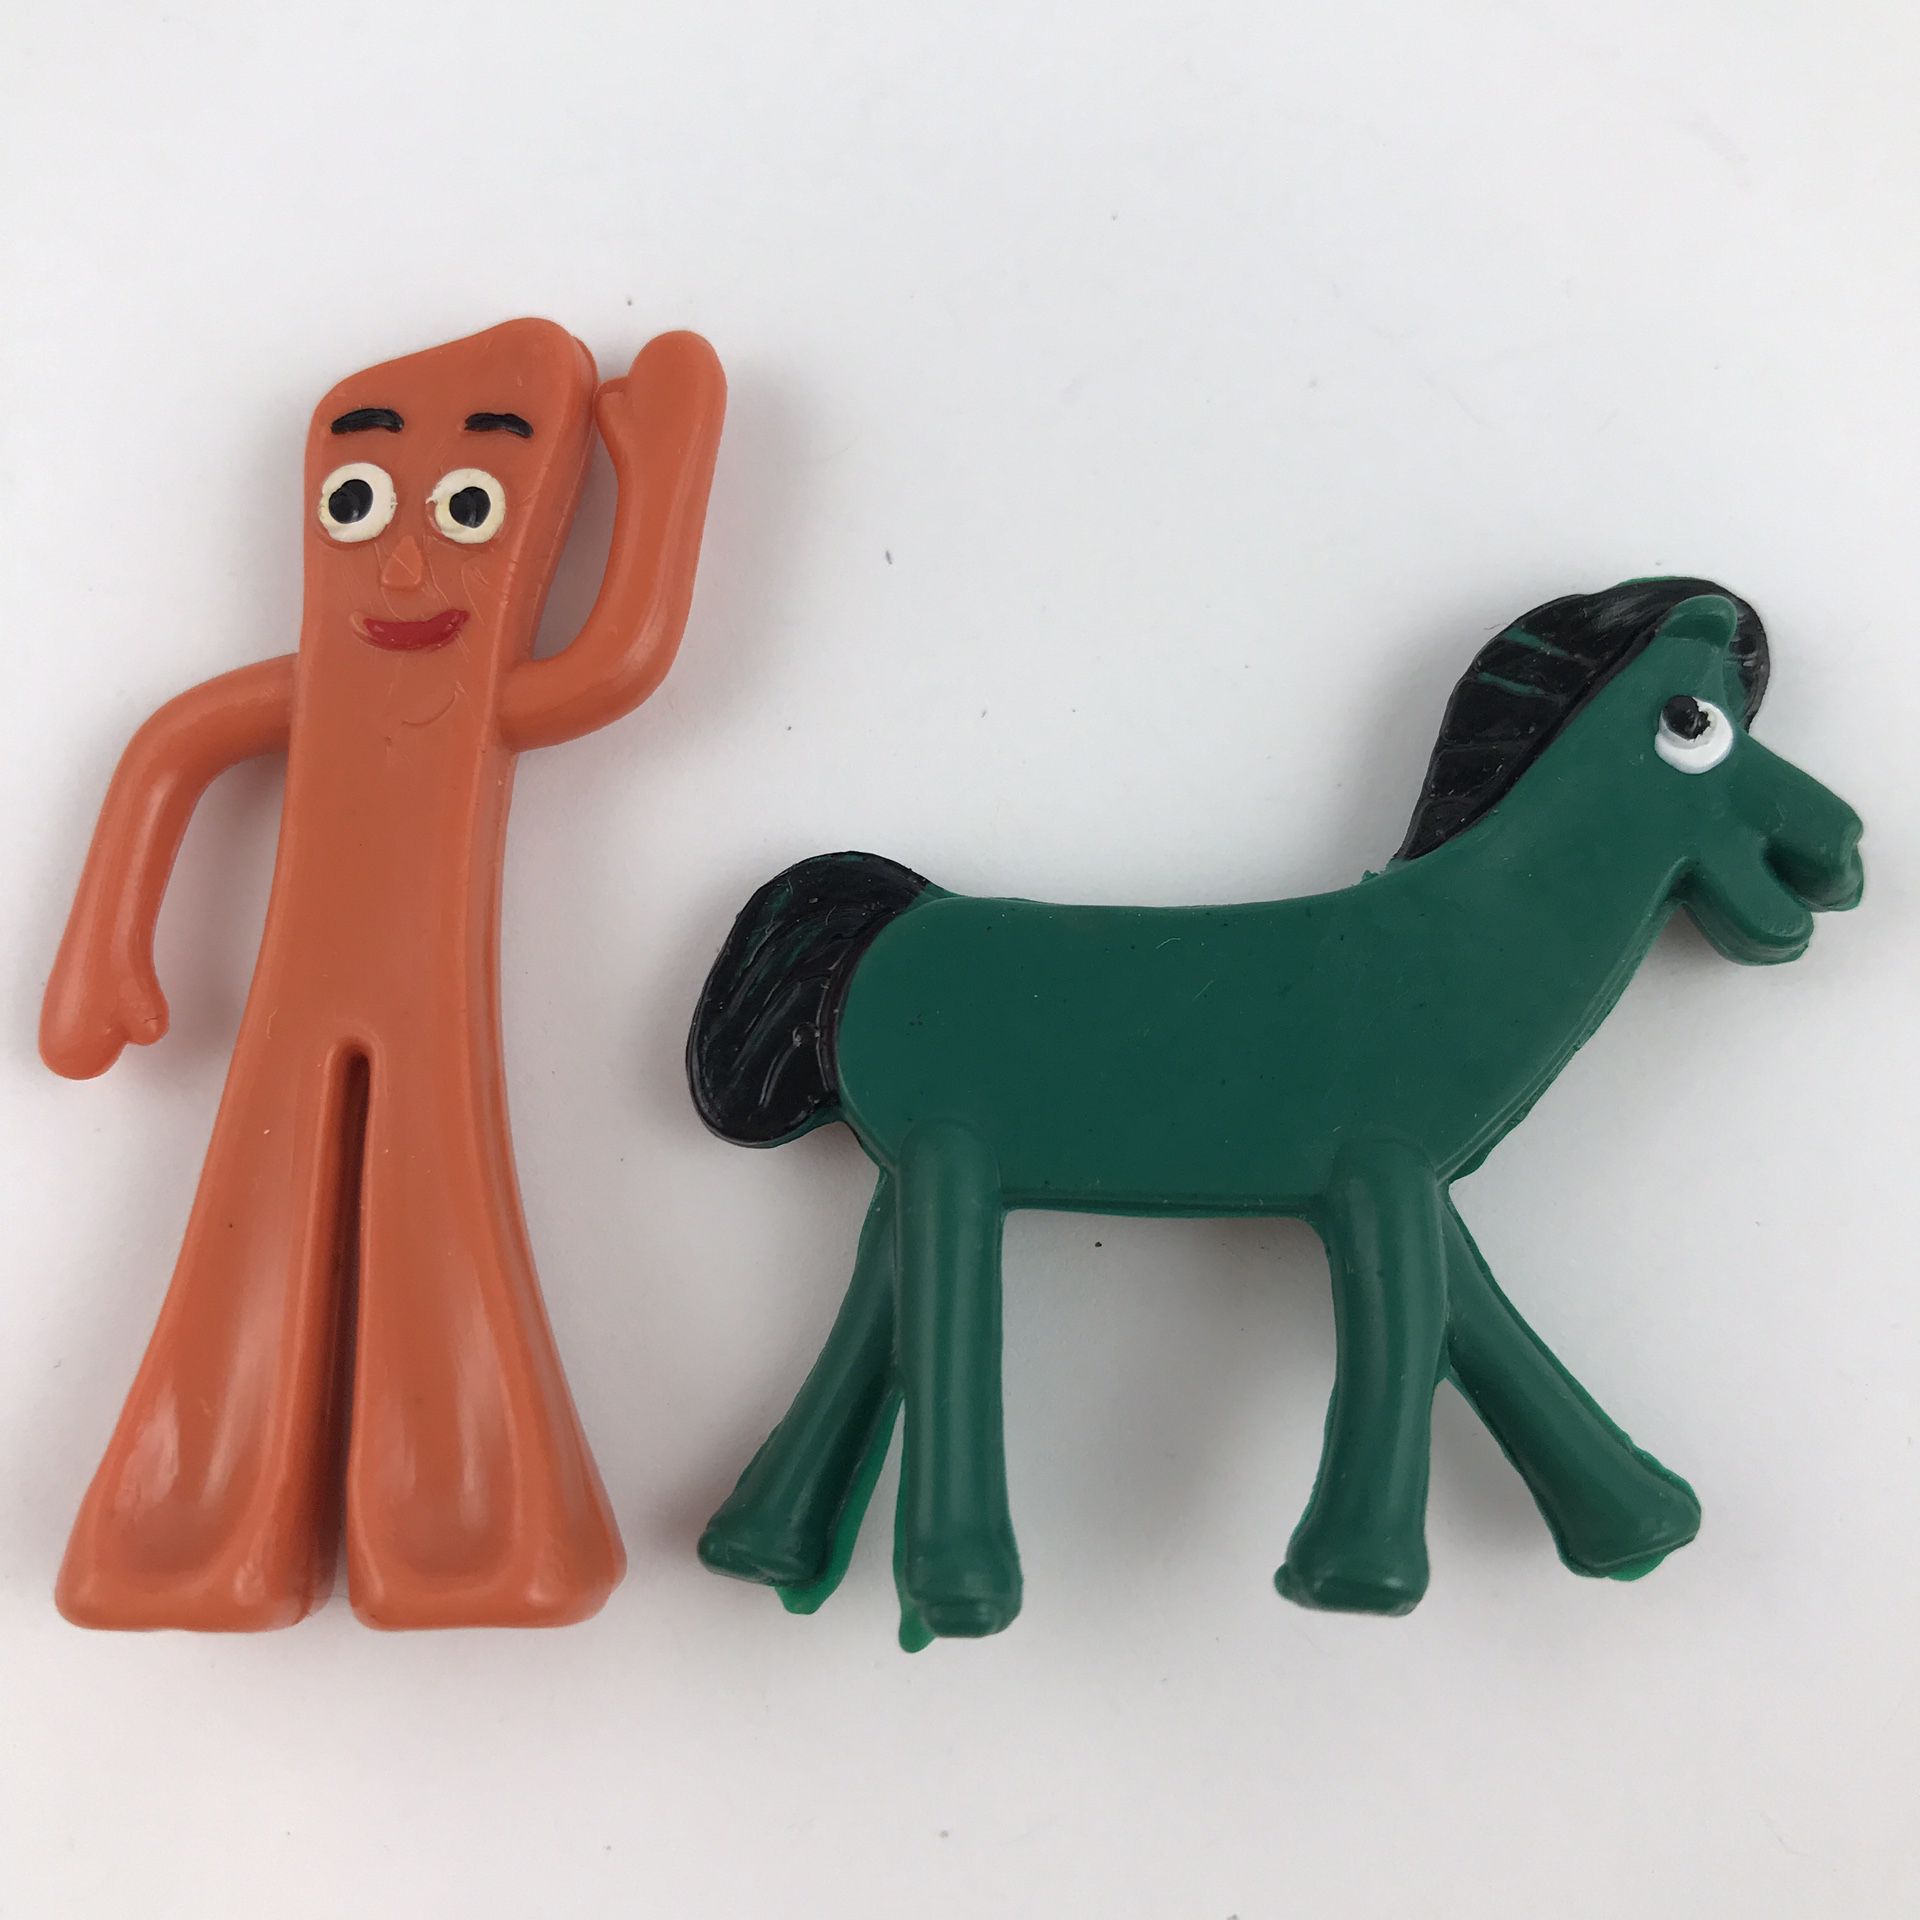 Gumby and Pokey 2” tall made of rubber